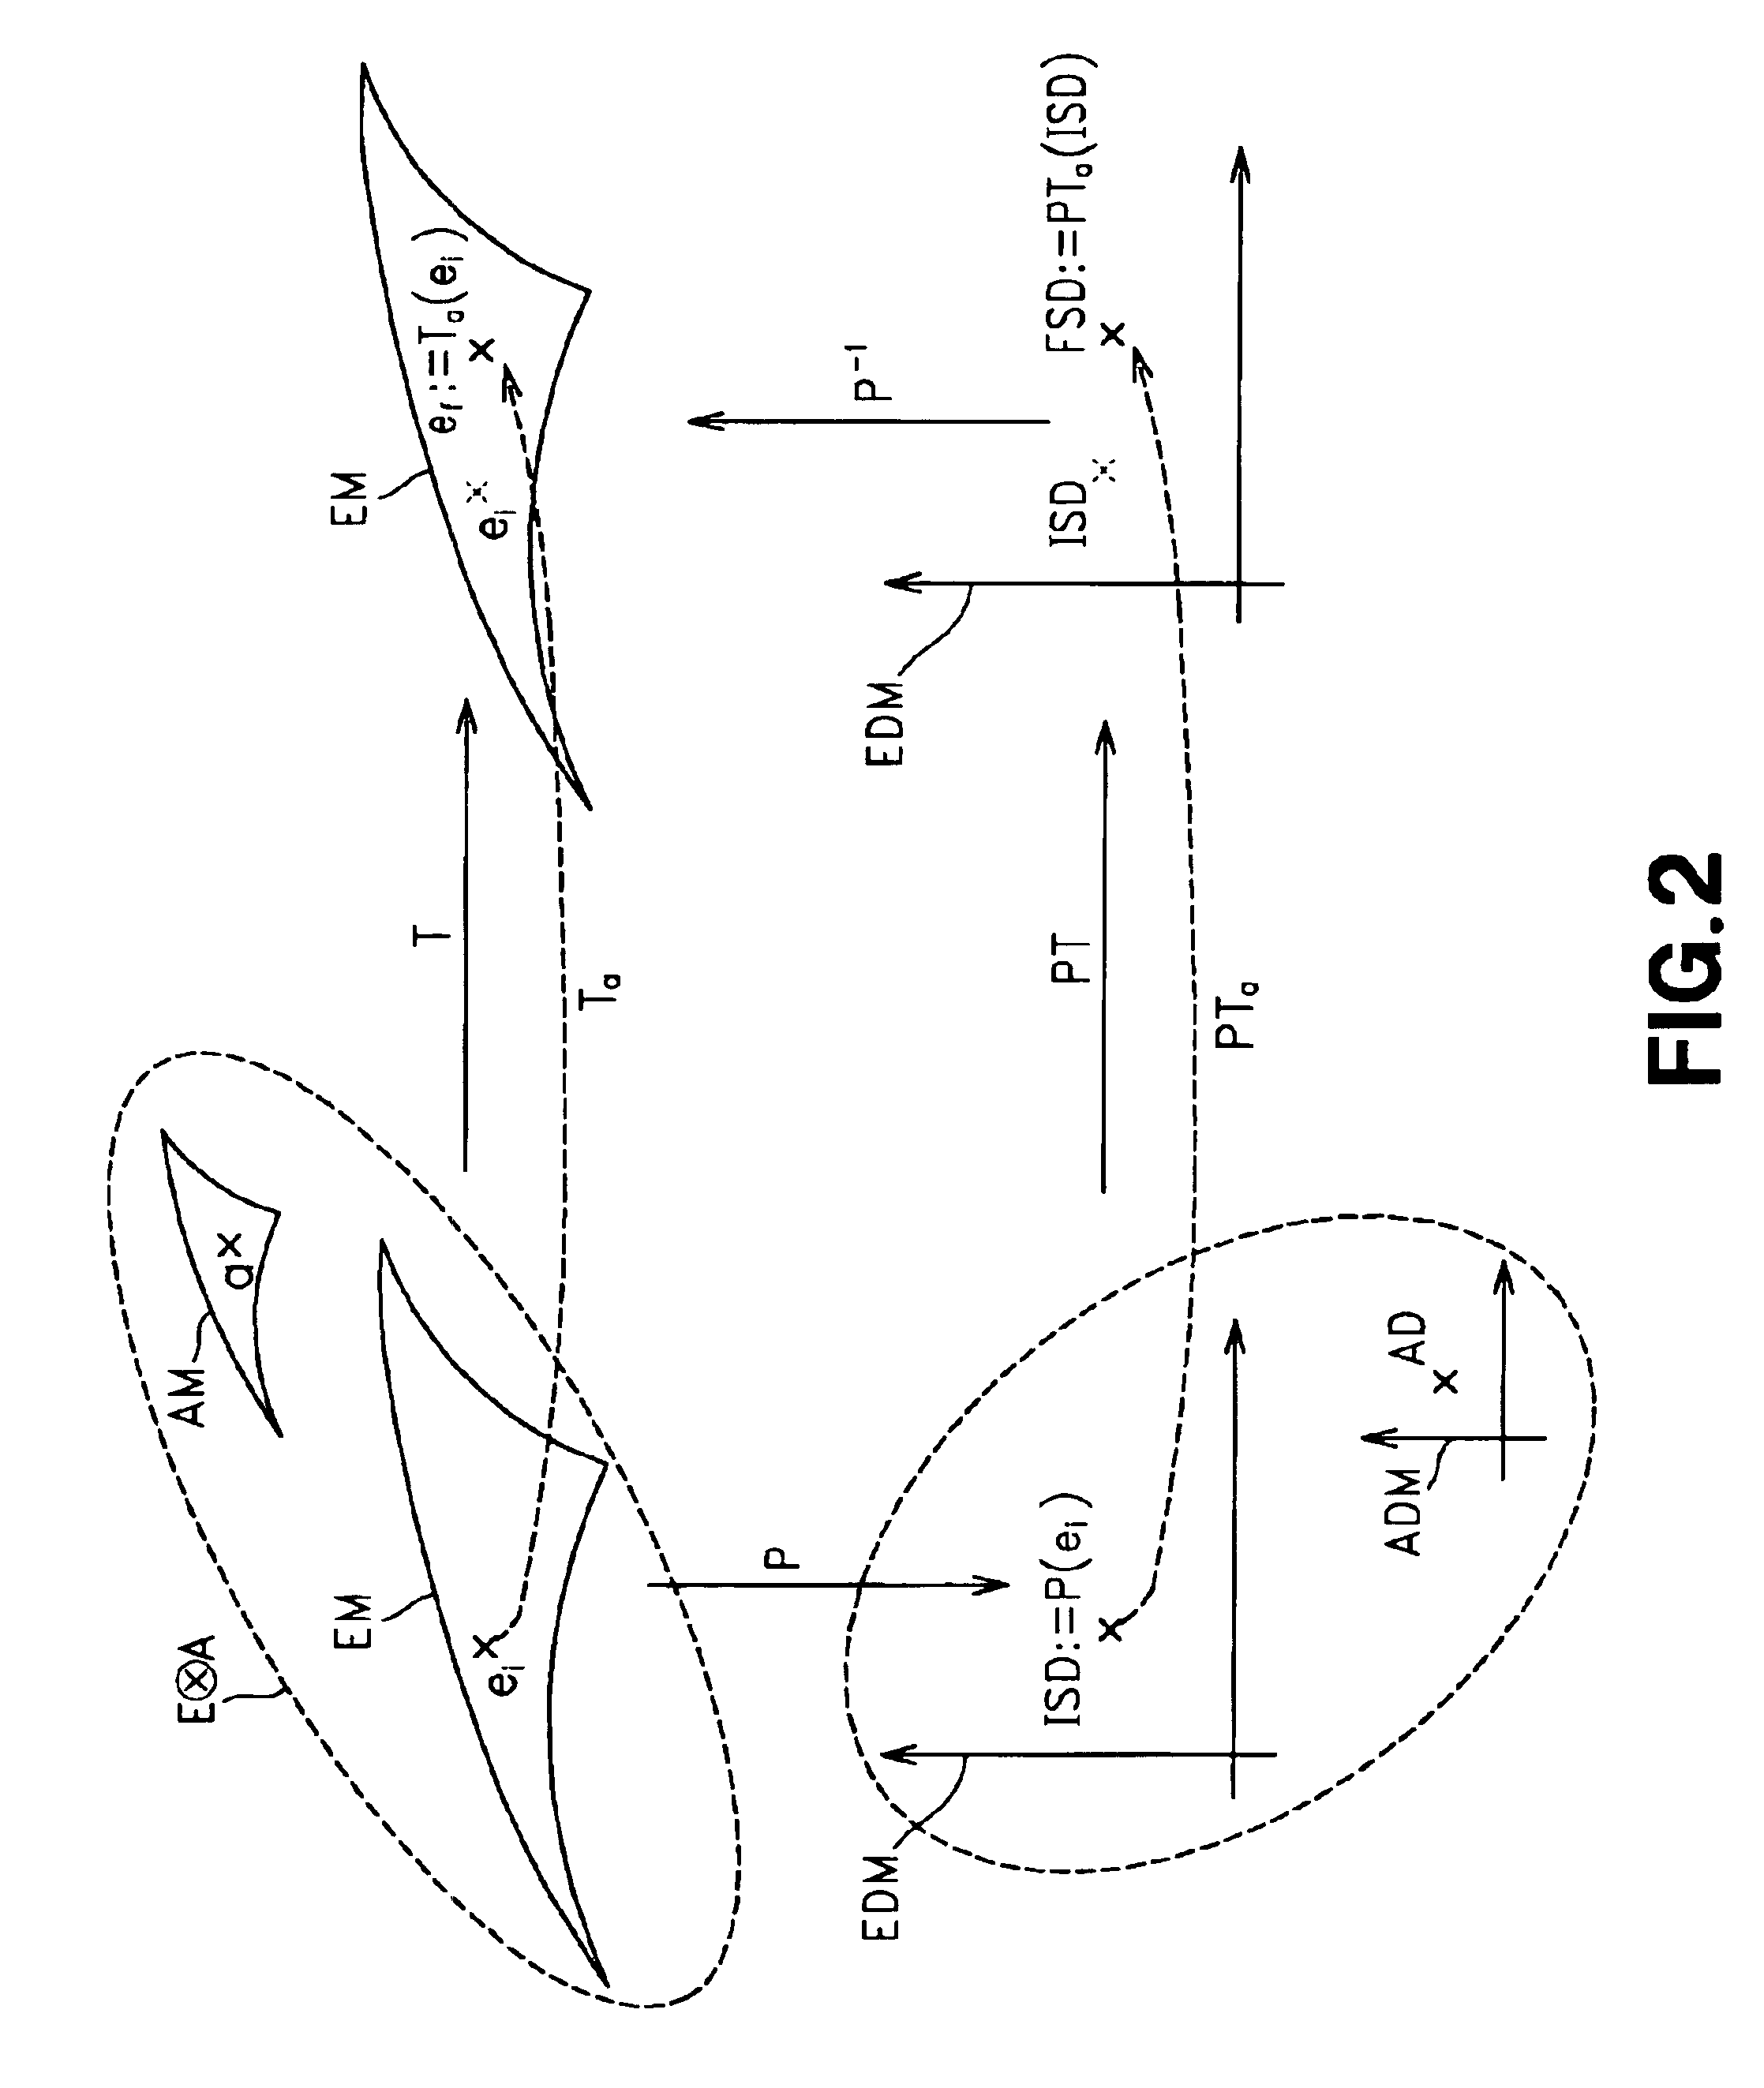 Man-machine interface unit control method, robot apparatus, and its action control method